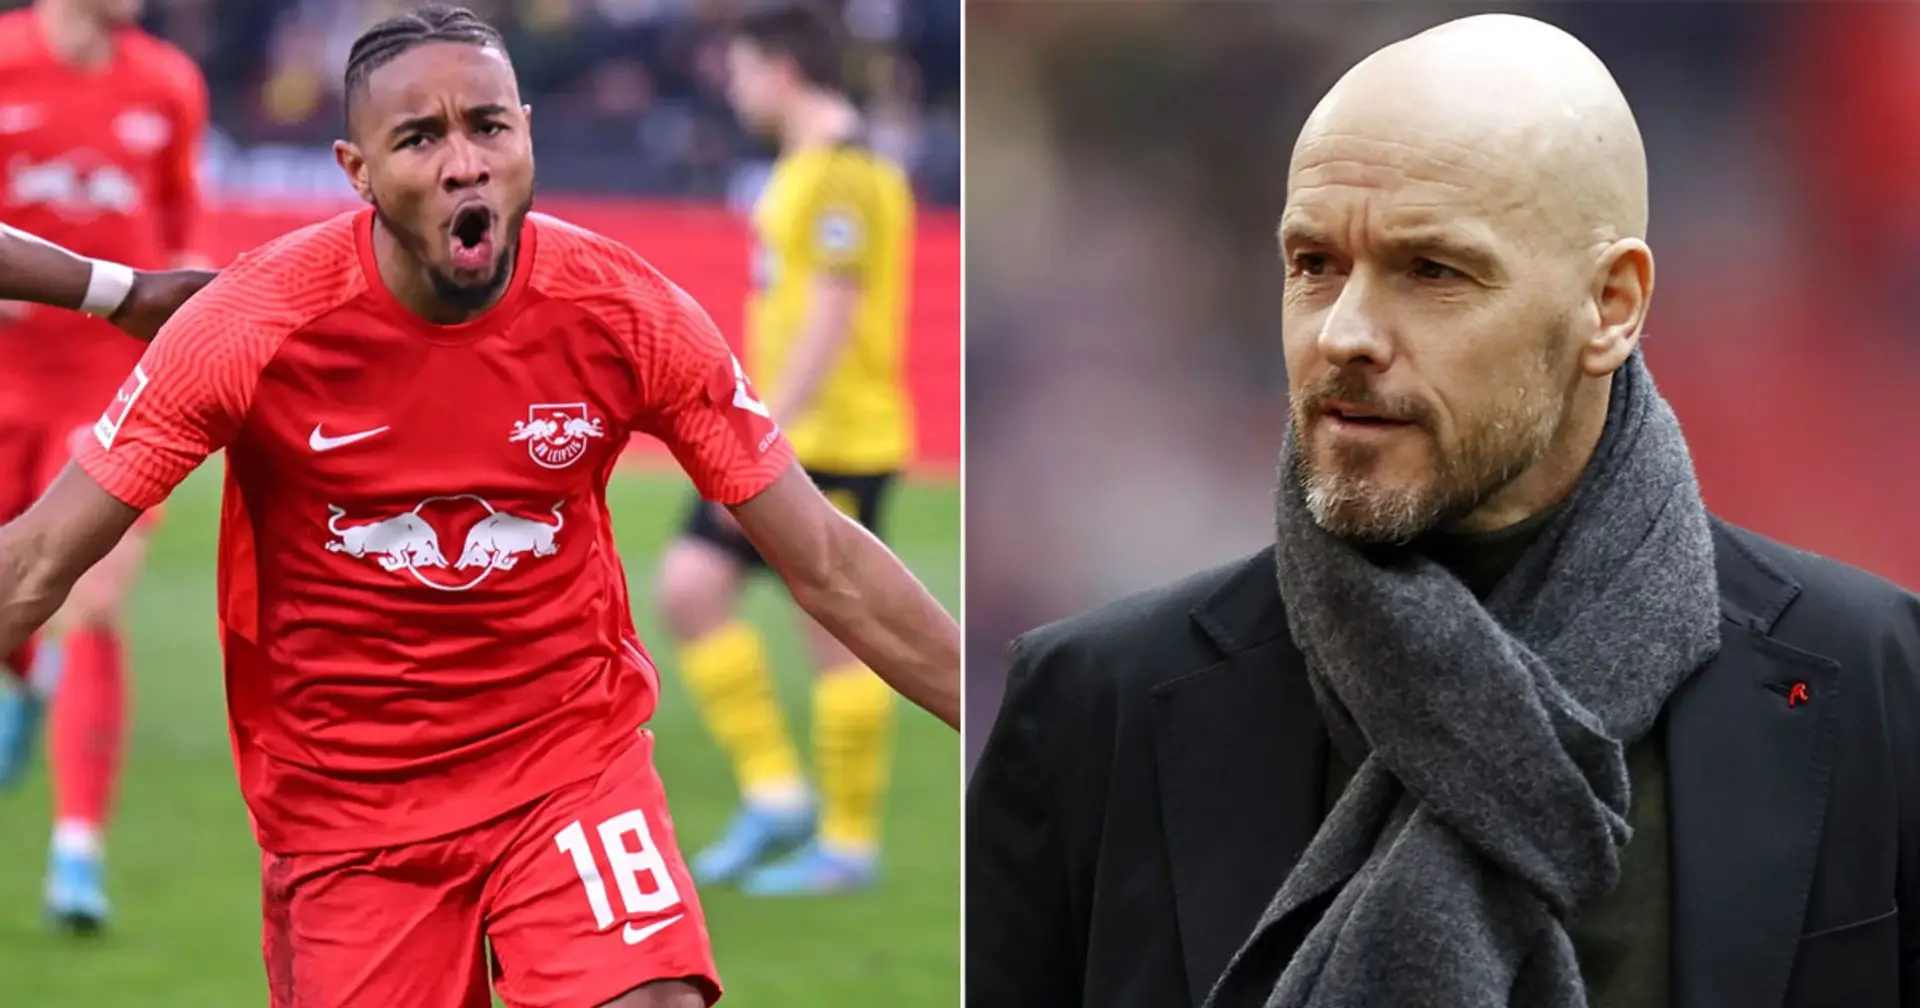 RB Leipzig offers multi-year contract to Ten Hag - race for his appointment ‘completely open again’ (reliability: 5 stars)